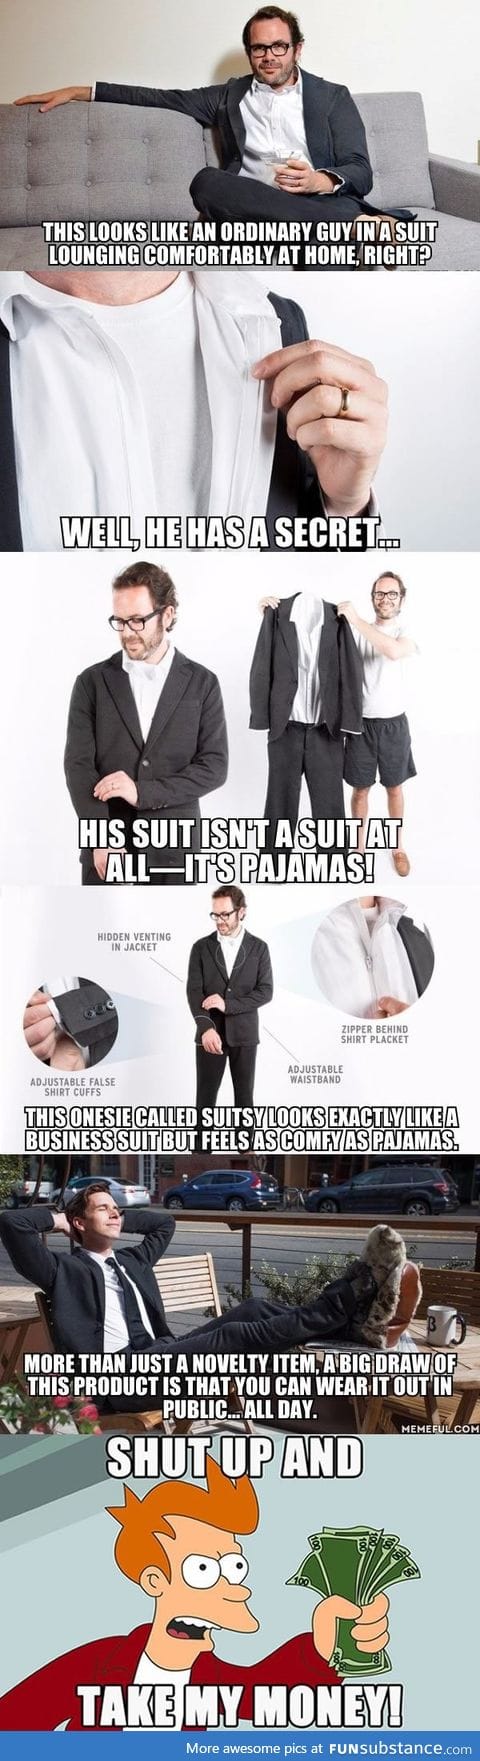 This formal suit is actually a pajama in disguise